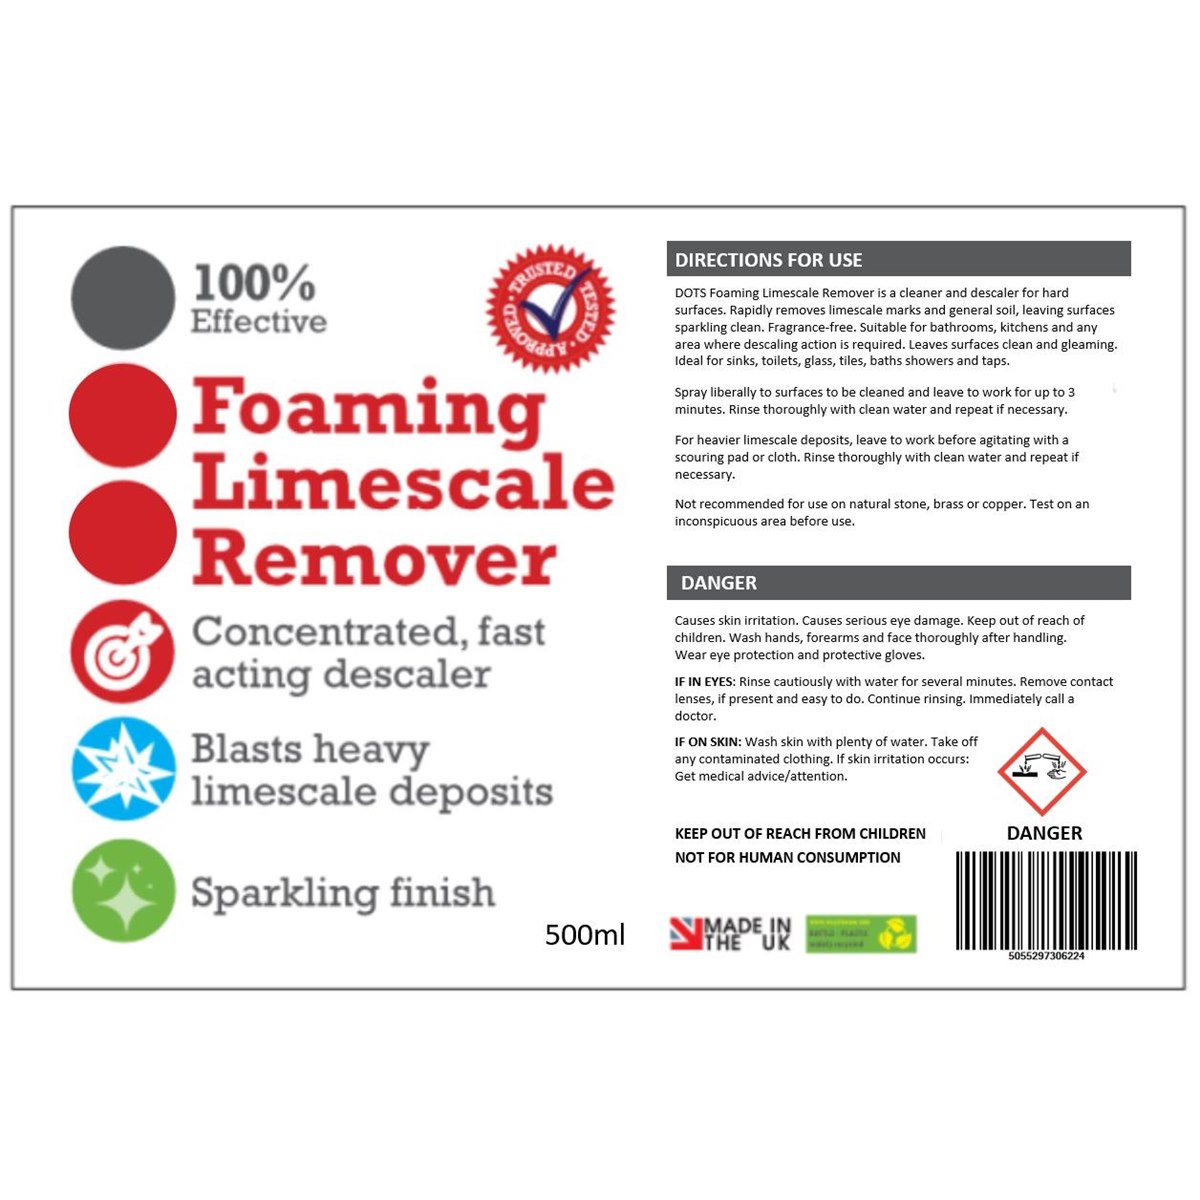 How-to-use-foaming-limescale-cleaner